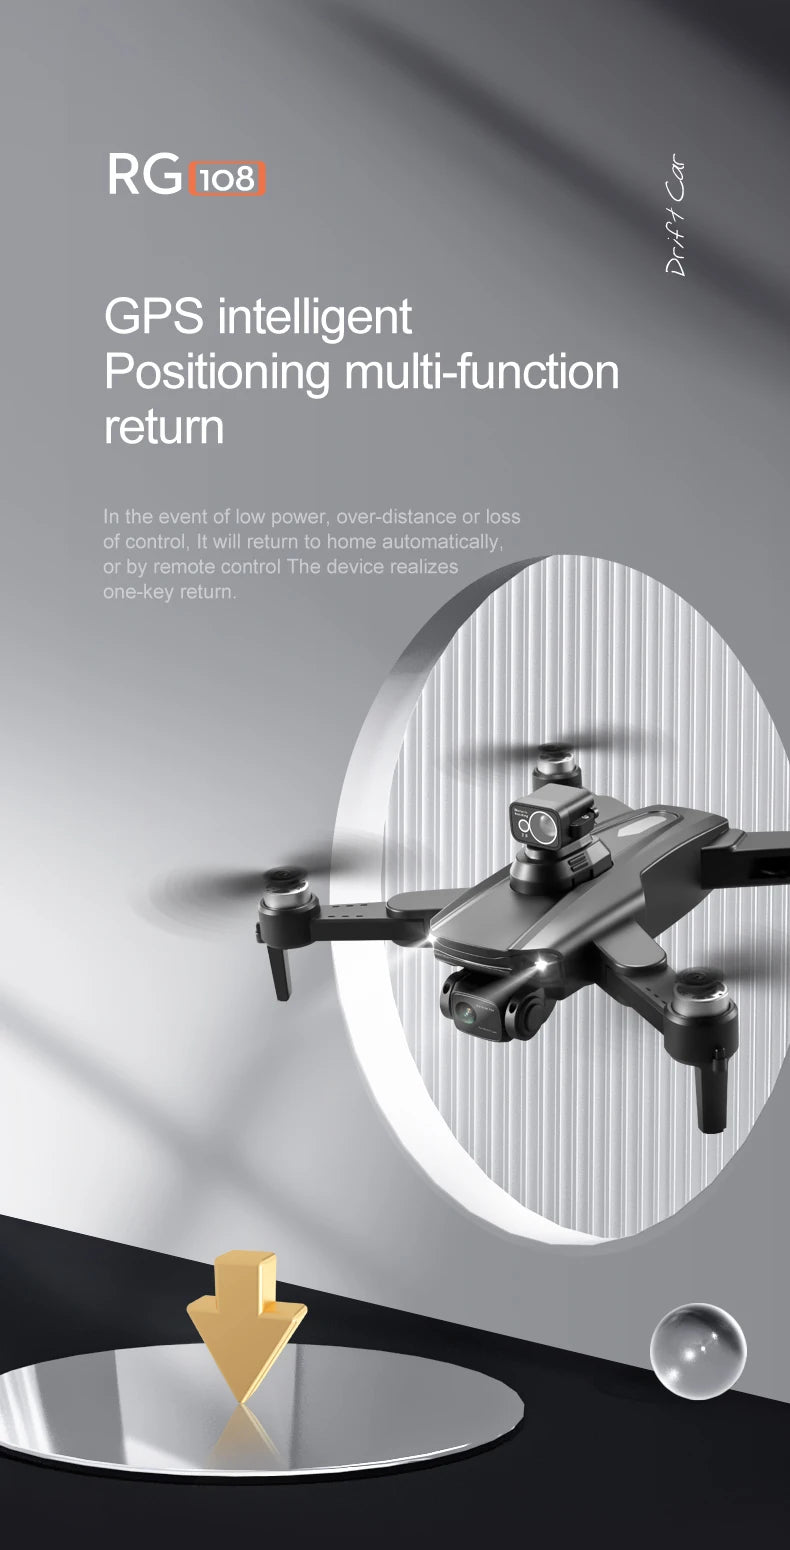 RG108 MAX Drone, RG 108 J GPS intelligent Positioning return in the event of low power; over-